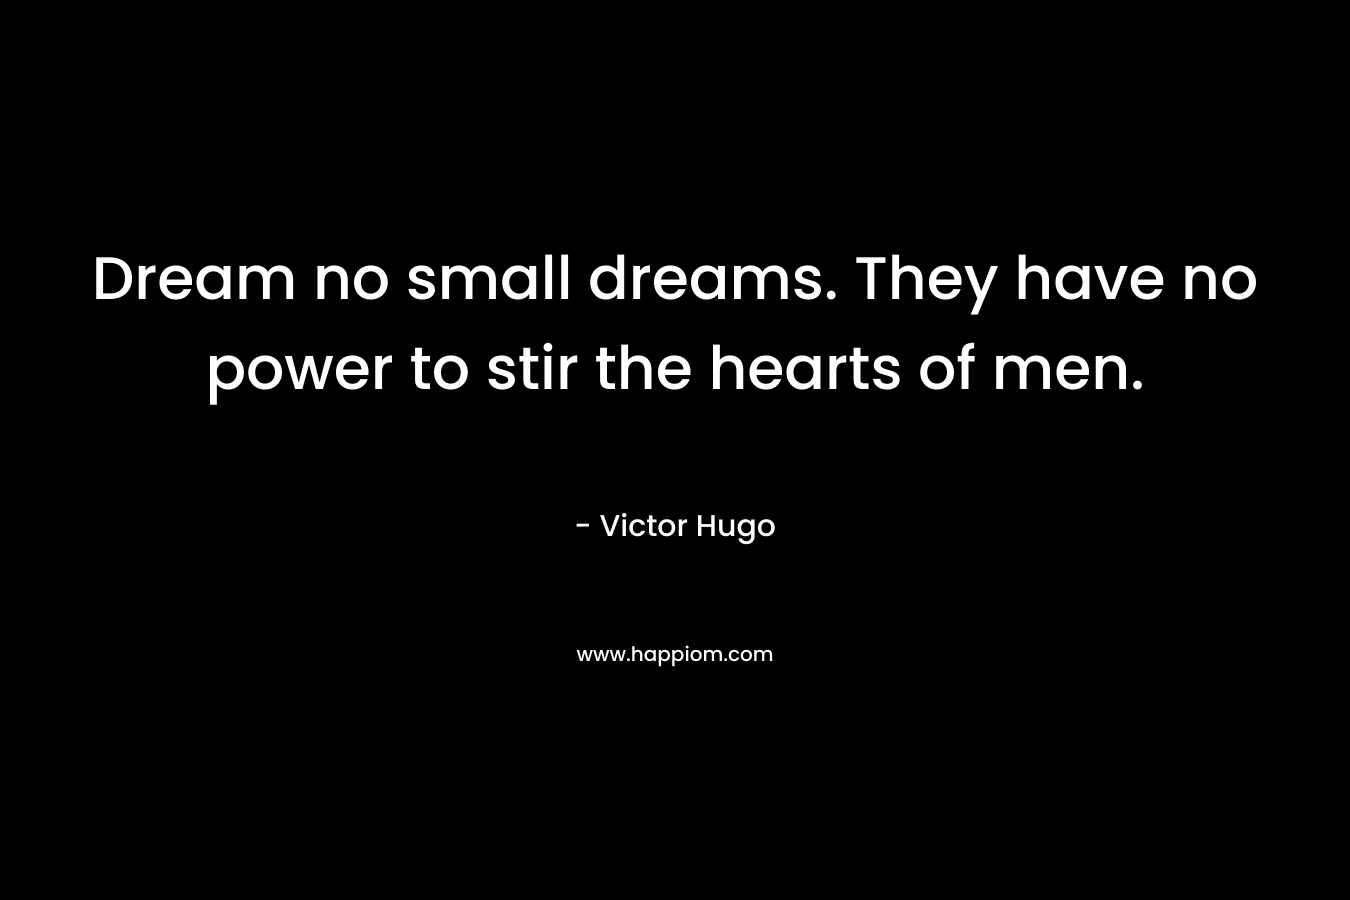 Dream no small dreams. They have no power to stir the hearts of men.